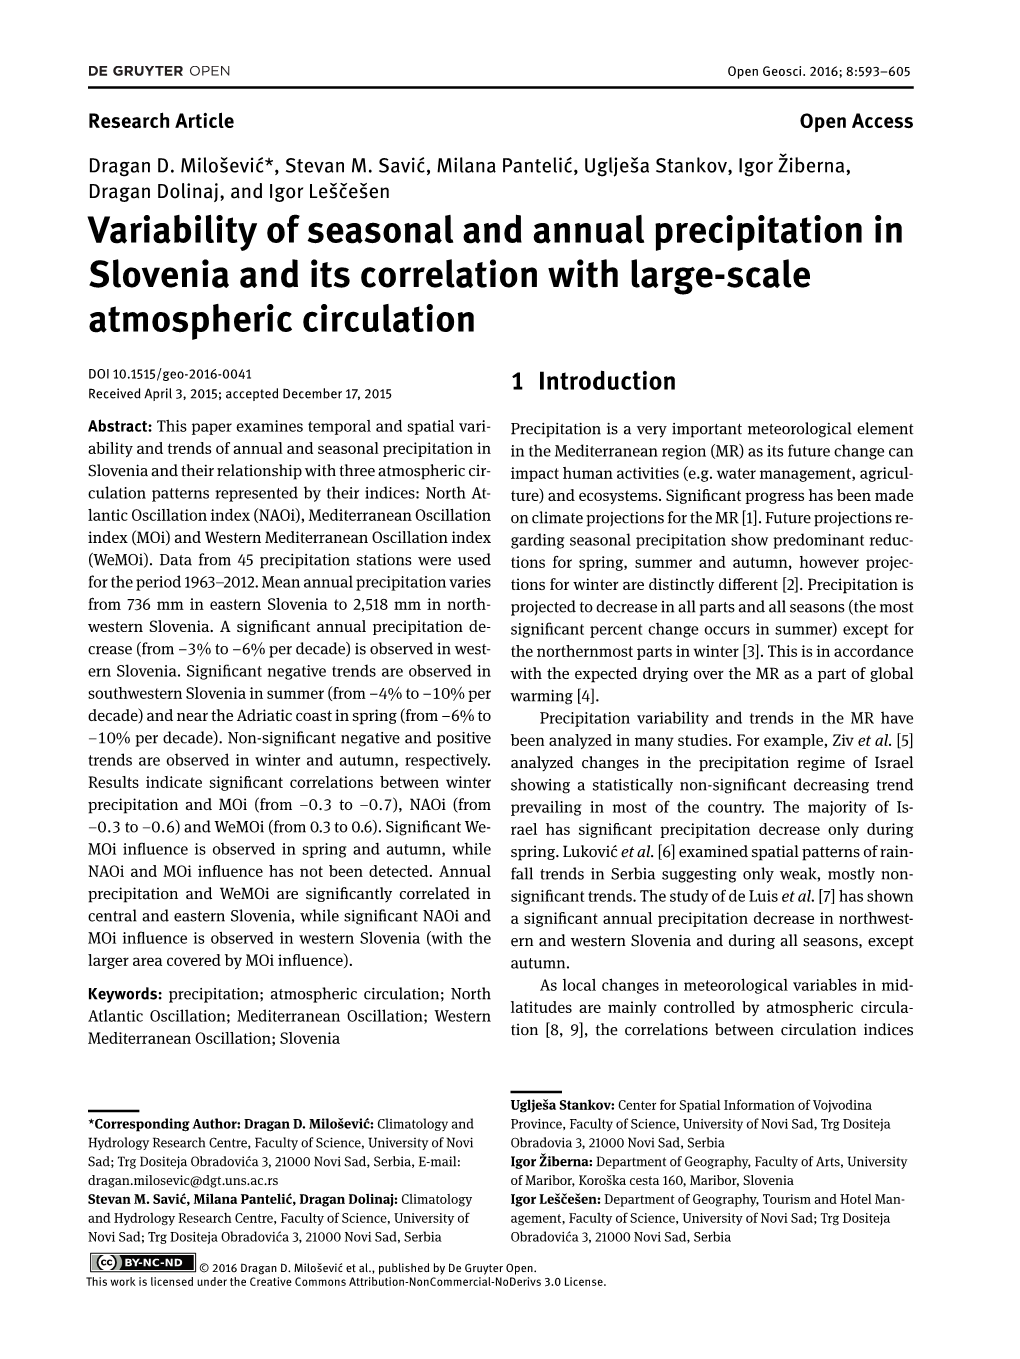 Variability of Seasonal and Annual Precipitation in Slovenia and Its Correlation with Large-Scale Atmospheric Circulation